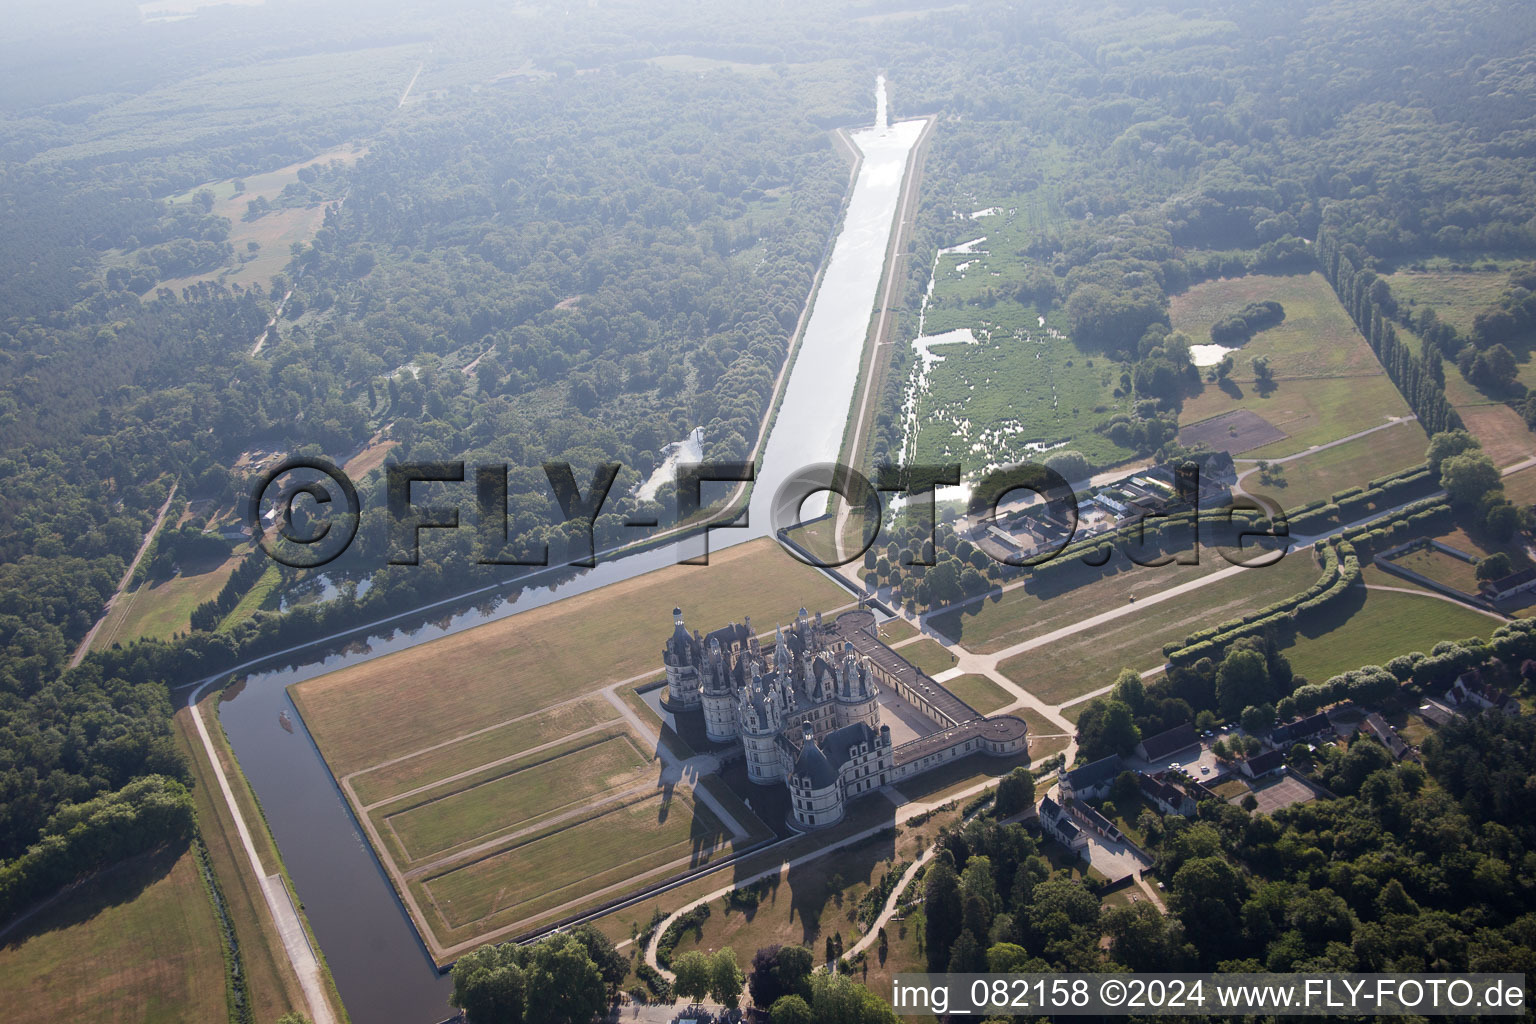 Chambord in the state Loir et Cher, France seen from above